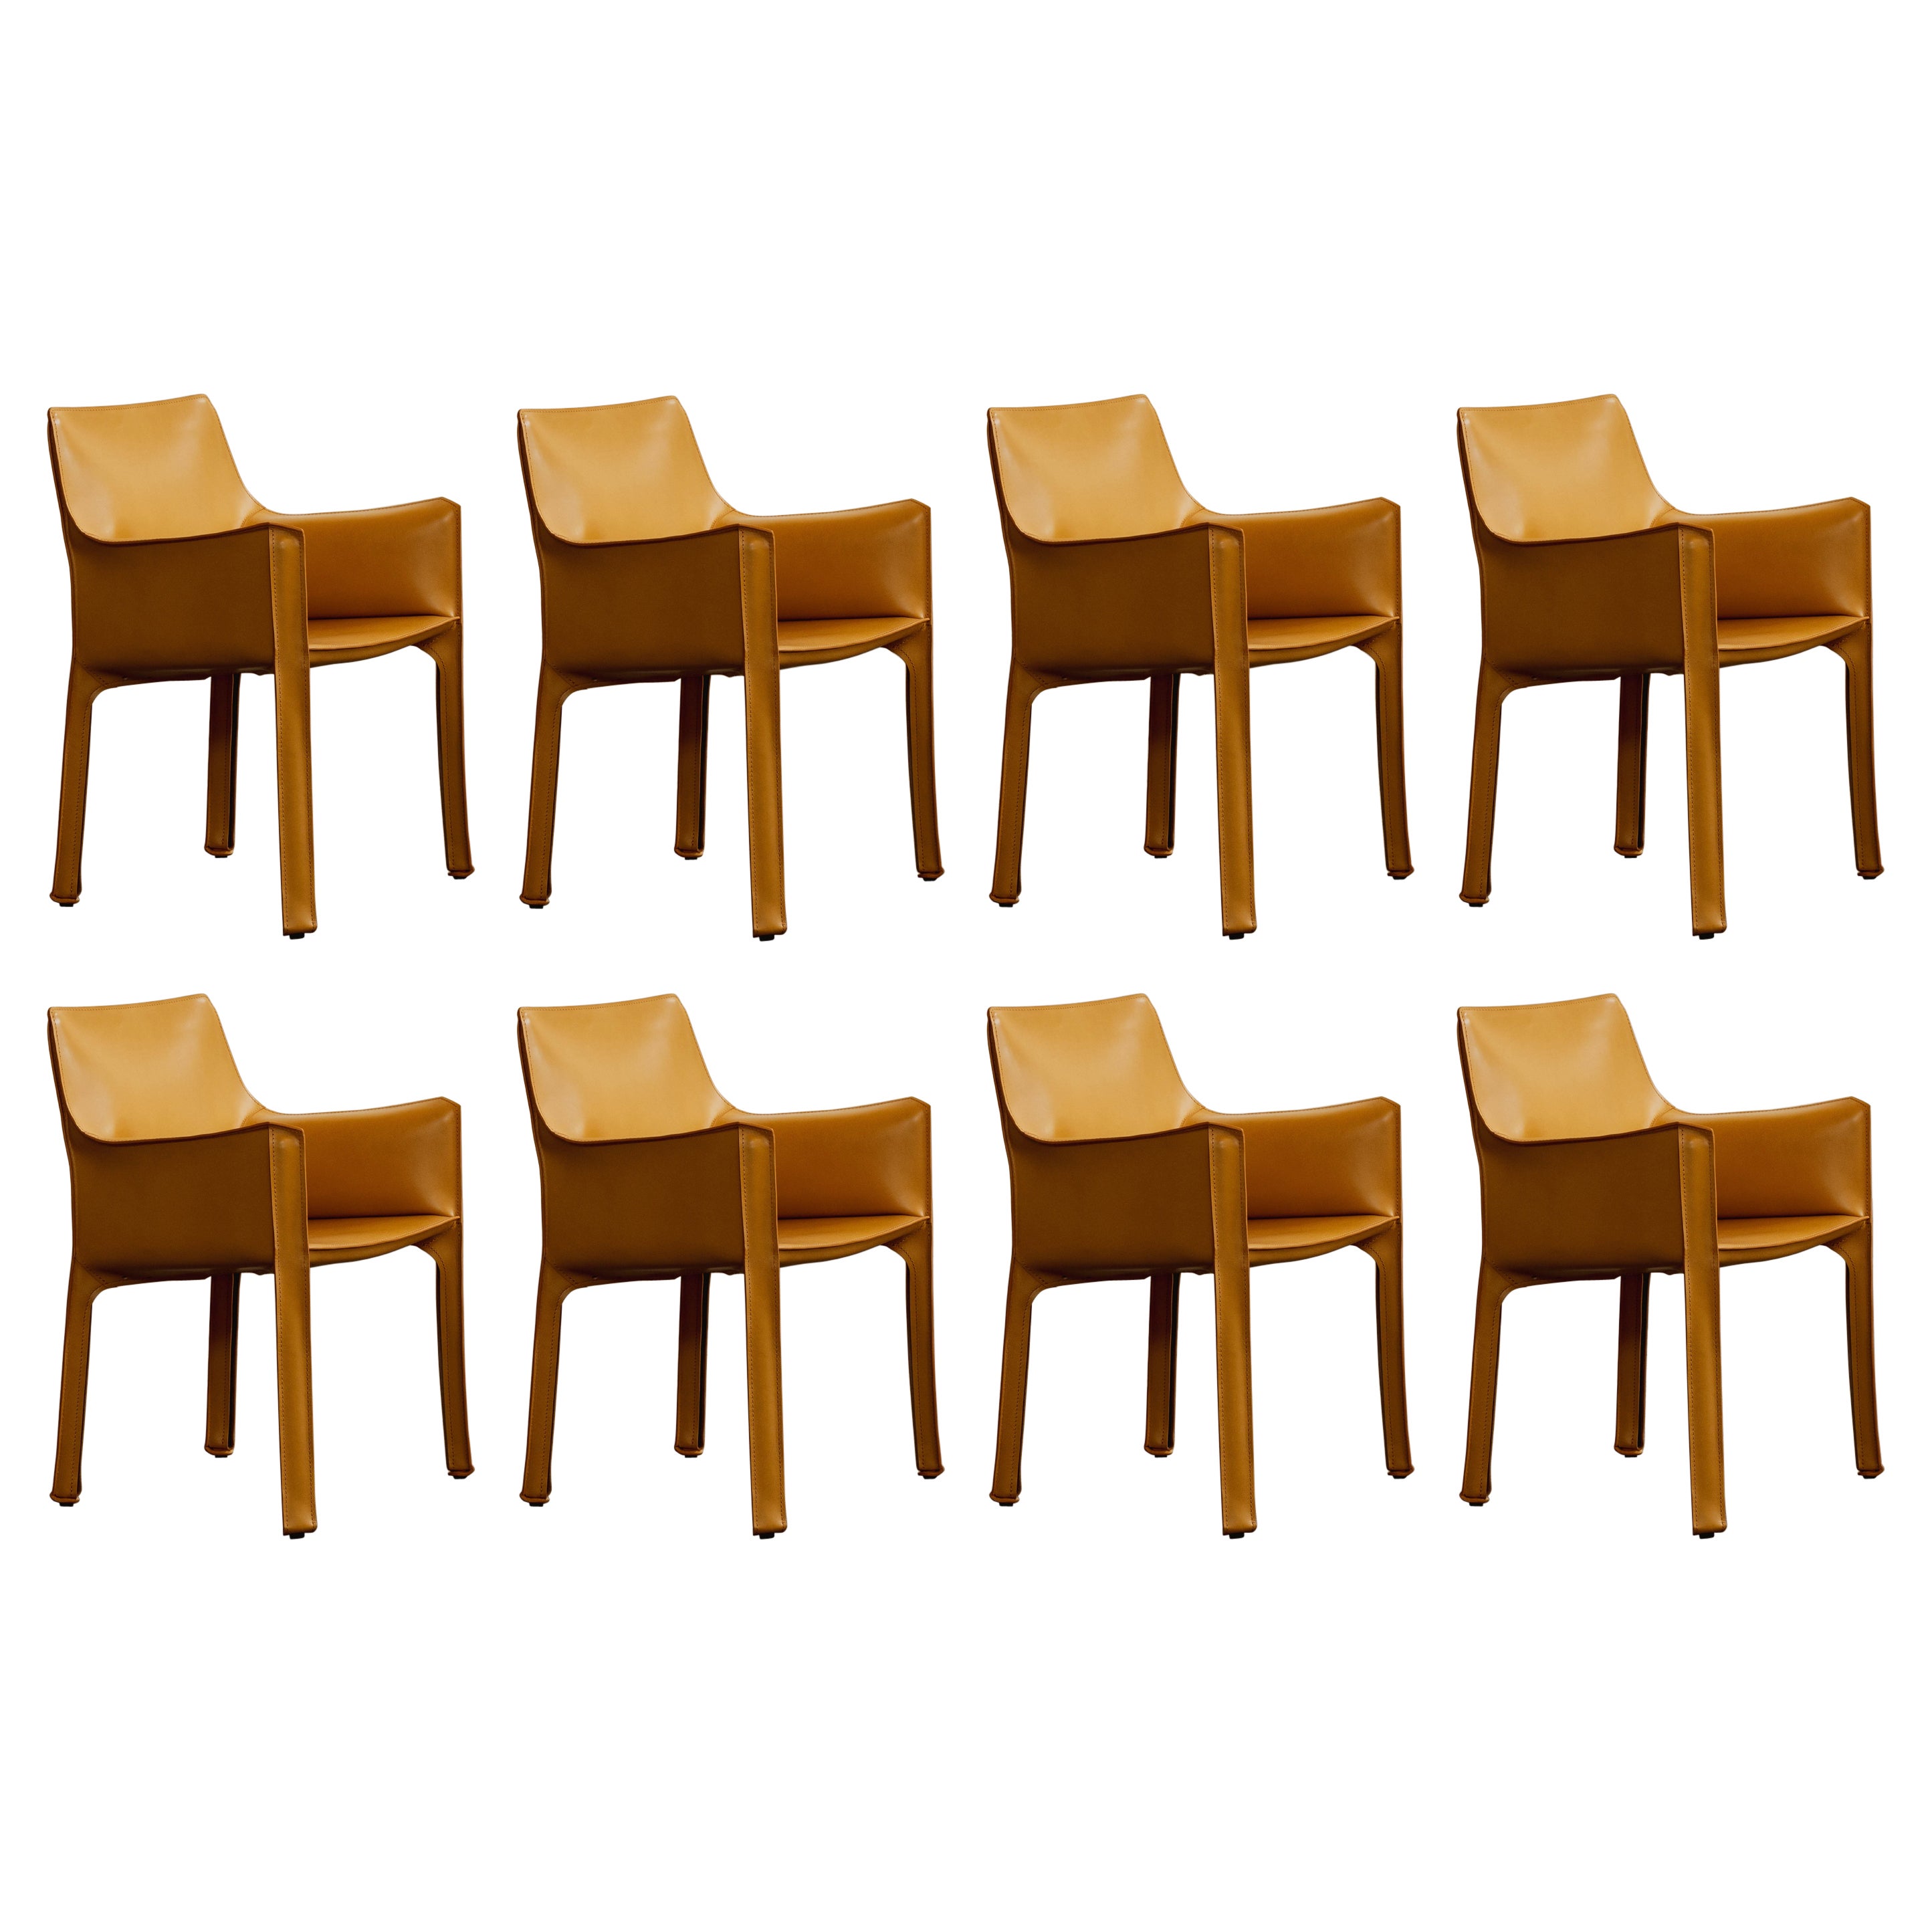 Mario Bellini "CAB 413" Chairs for Cassina in Yellow, 1977, Set of 8